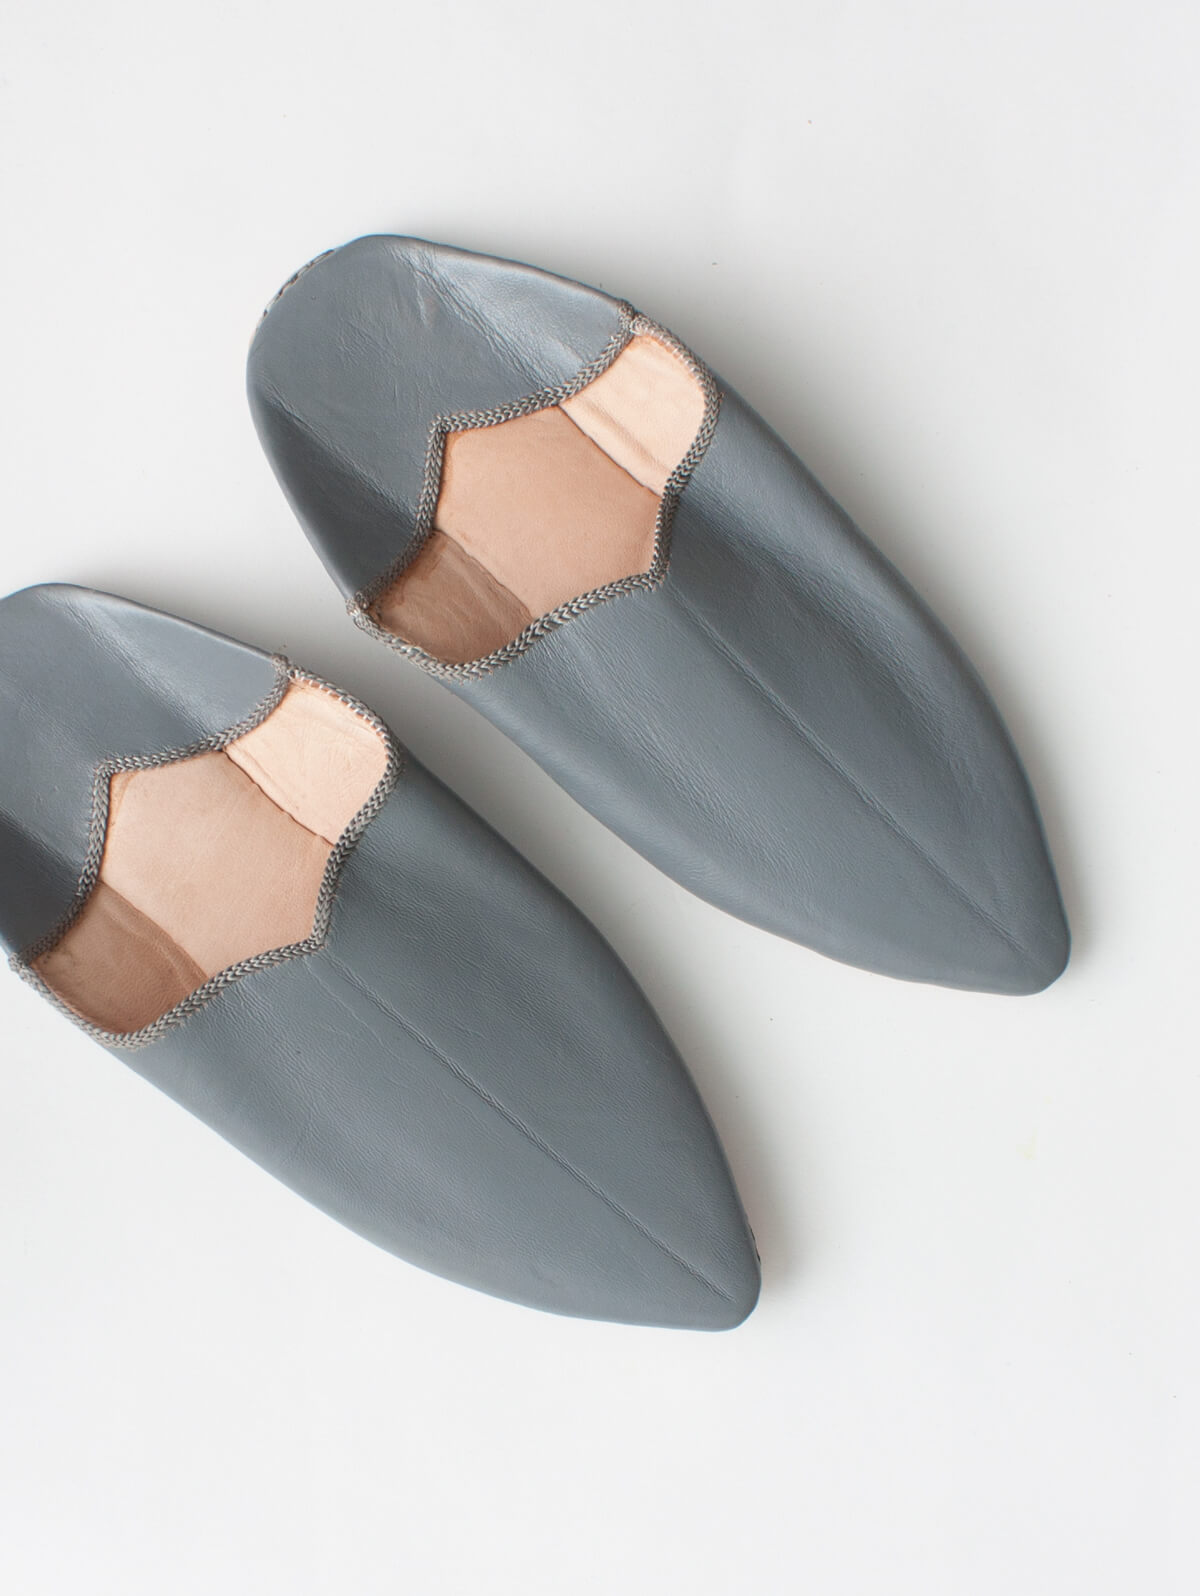 Moroccan Plain Pointed Babouche Slippers, Grey